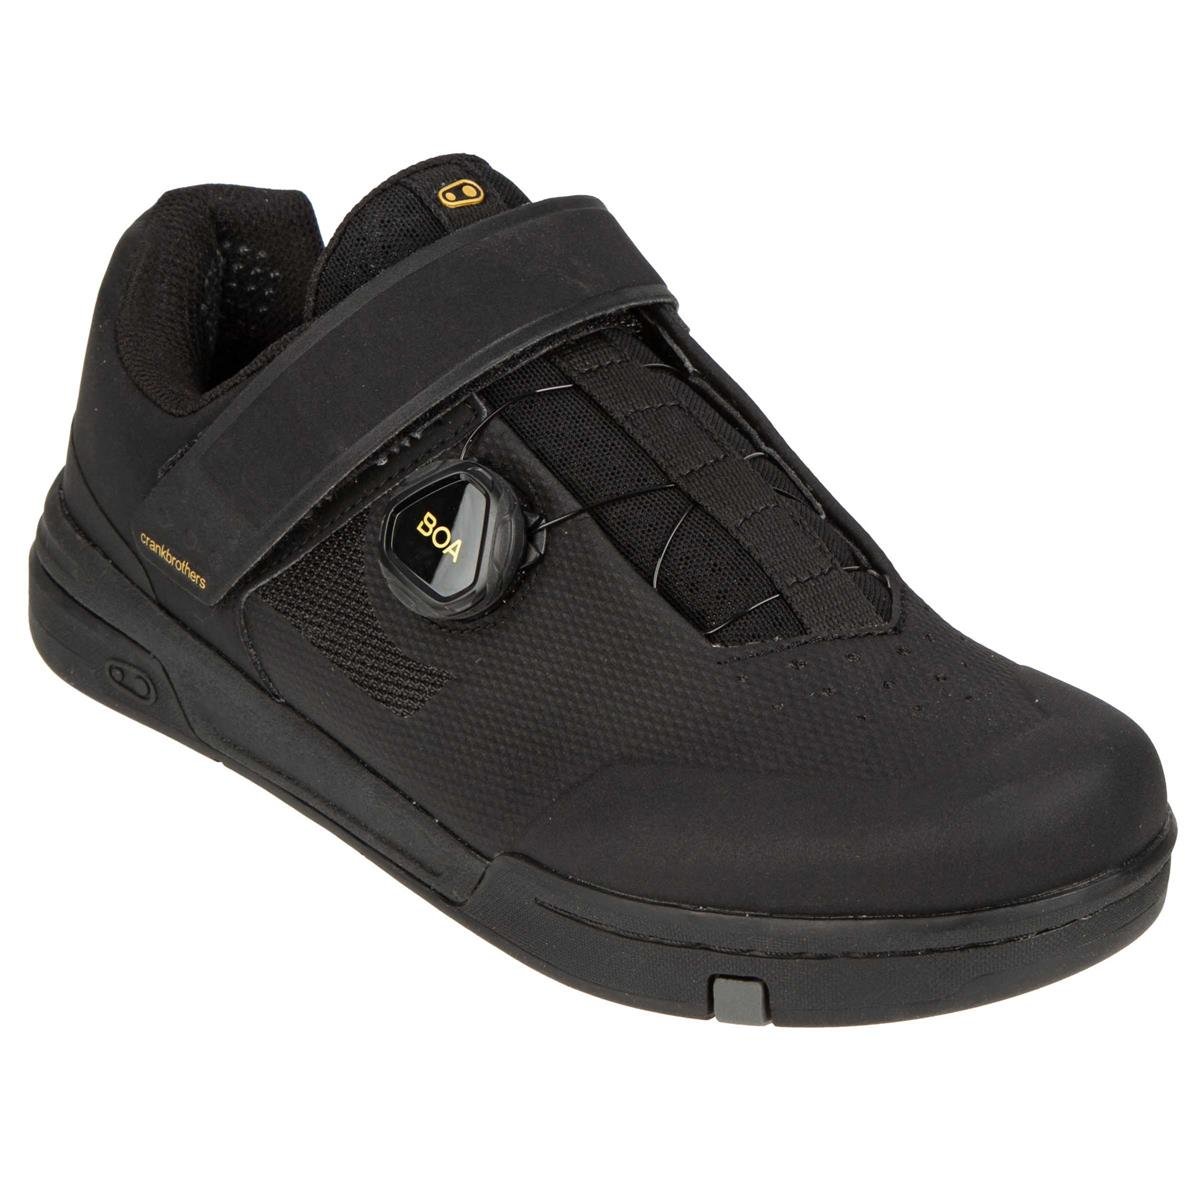 Crankbrothers Chaussures VTT Stamp Boa Strap Noir/Or